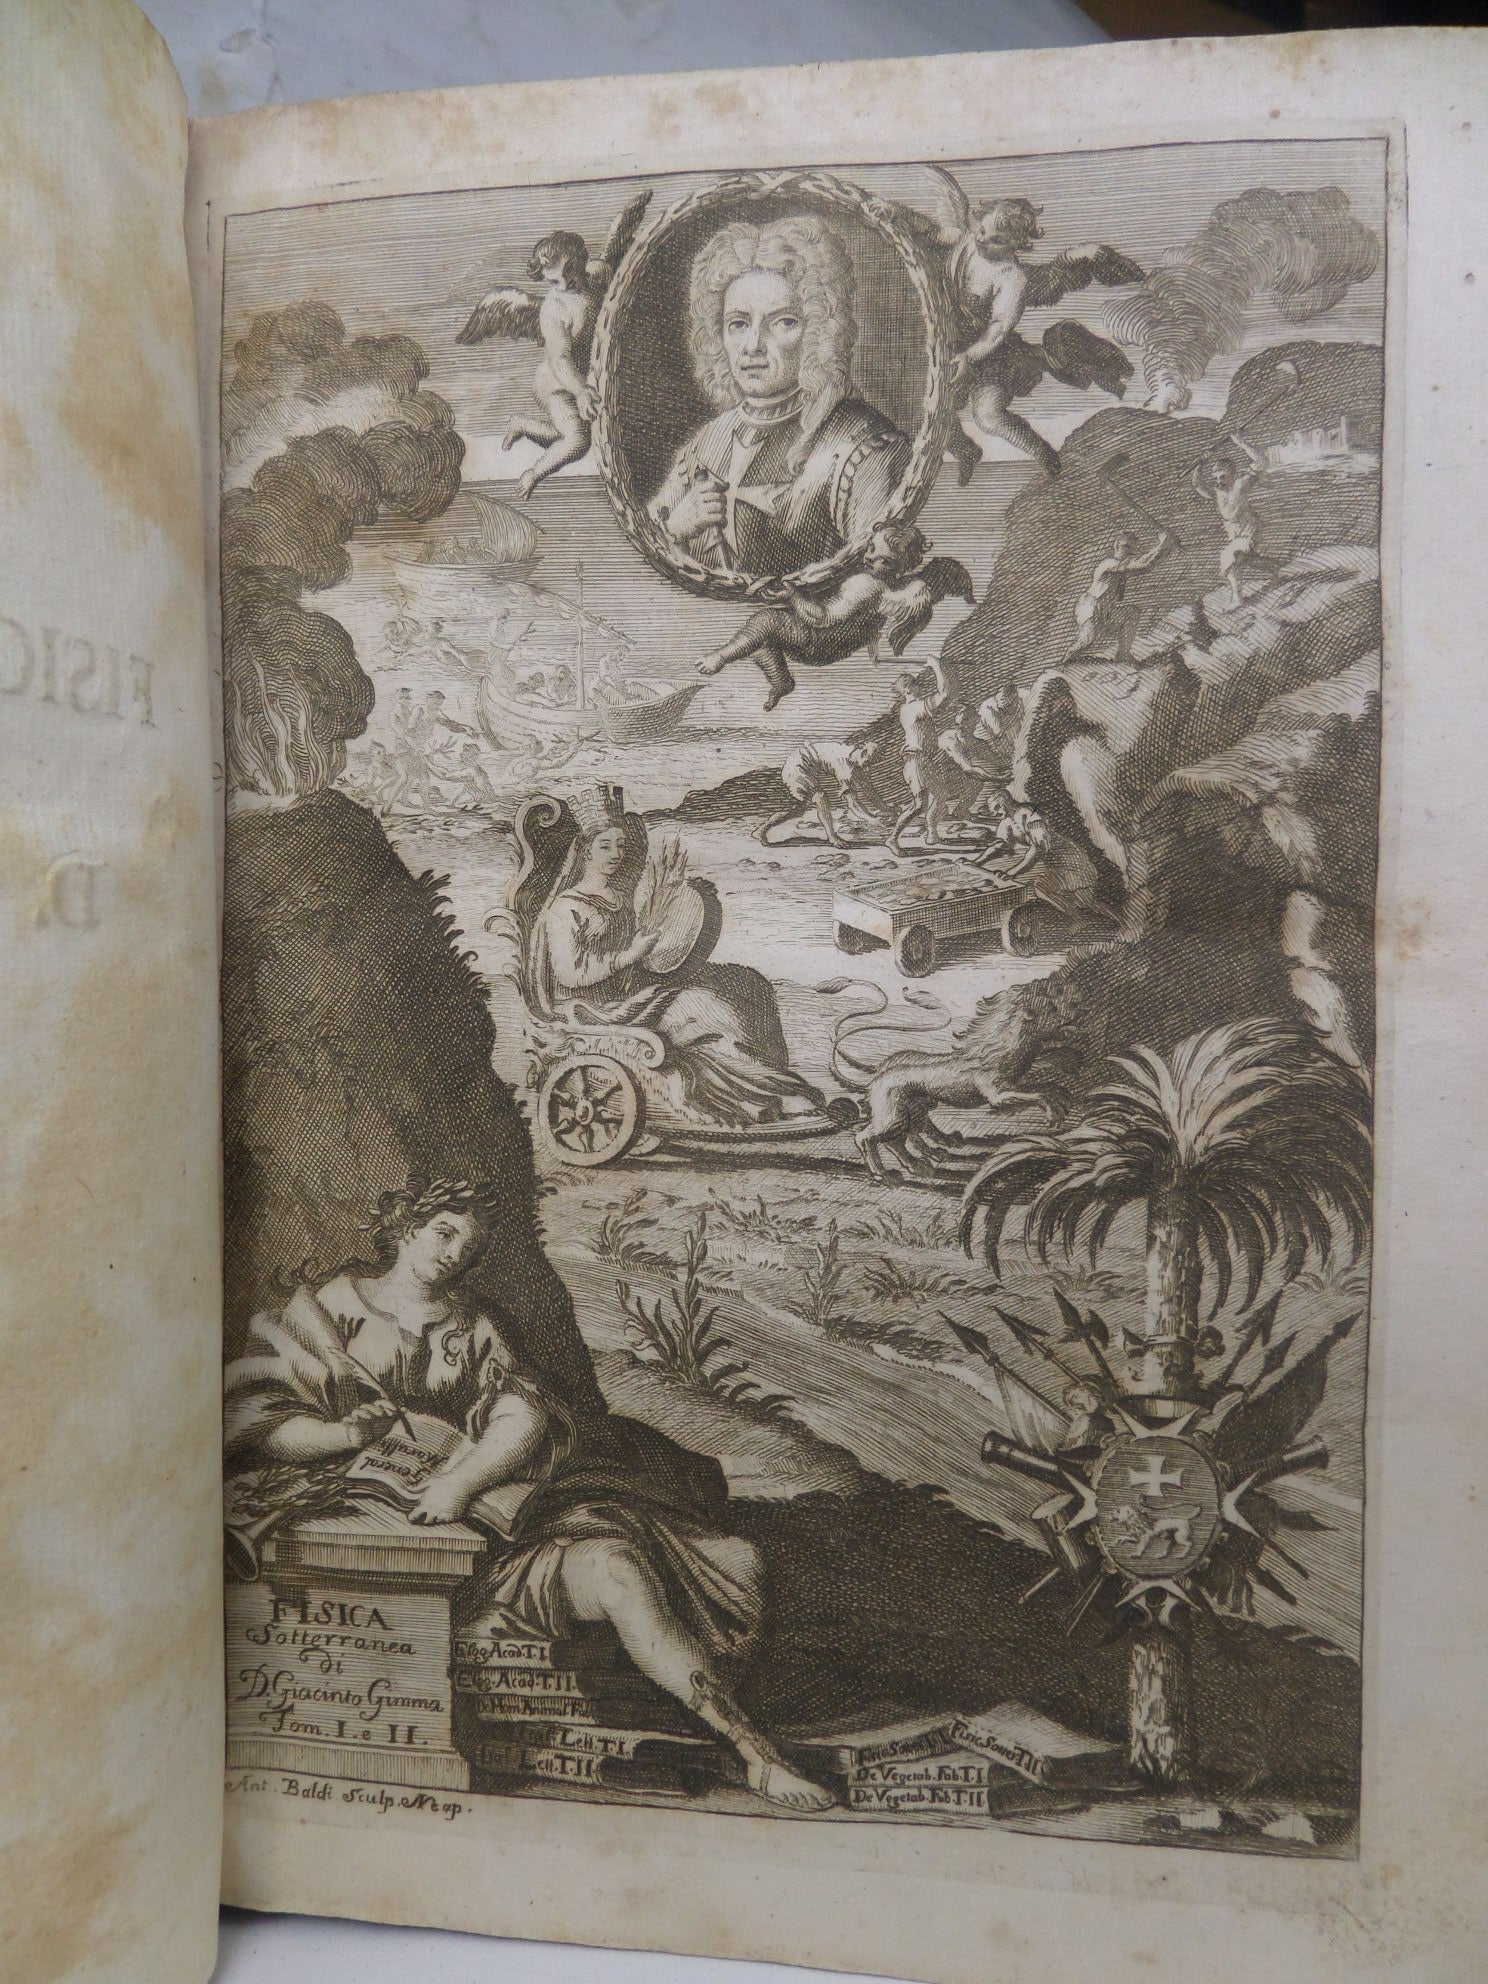 DELLA STORIA NATURALE DELLE GEMME BY GIACINTO GIMMA 1730 NATURAL HISTORY OF GEMS